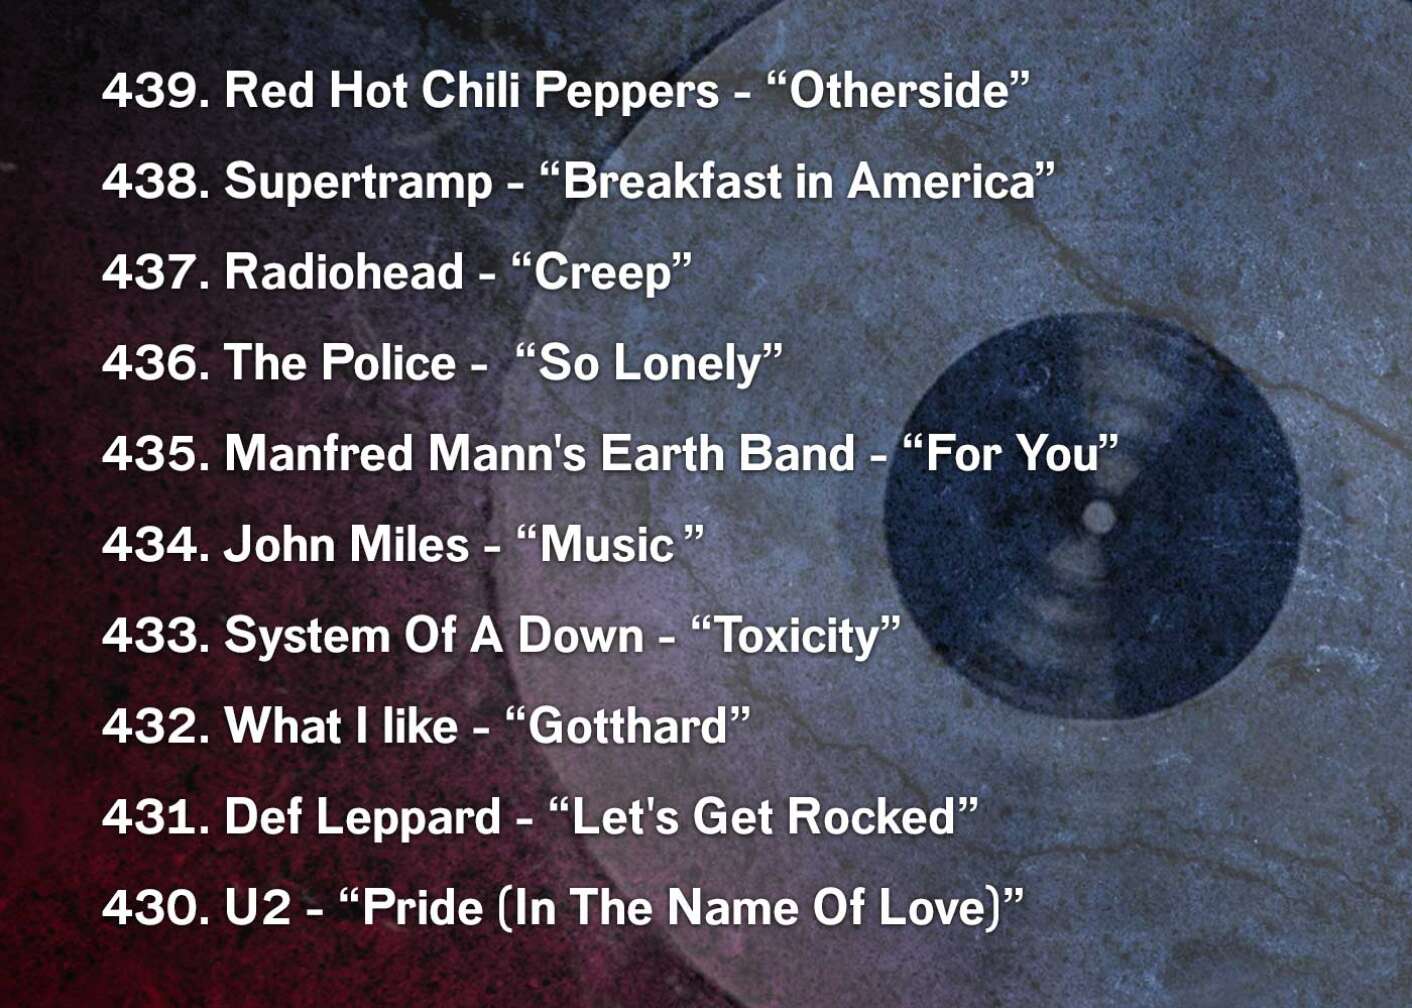 439. Red Hot Chili Peppers - “Otherside” 438. Supertramp - “Breakfast in America” 437. Radiohead - “Creep” 436. The Police -  “So Lonely” 435. Manfred Mann's Earth Band - “For You” 434. John Miles - “Music	” 433. System Of A Down - “Toxicity” 432. What I like - “Gotthard” 431. Def Leppard - “Let's Get Rocked” 430. U2 - “Pride (In The Name Of Love)”